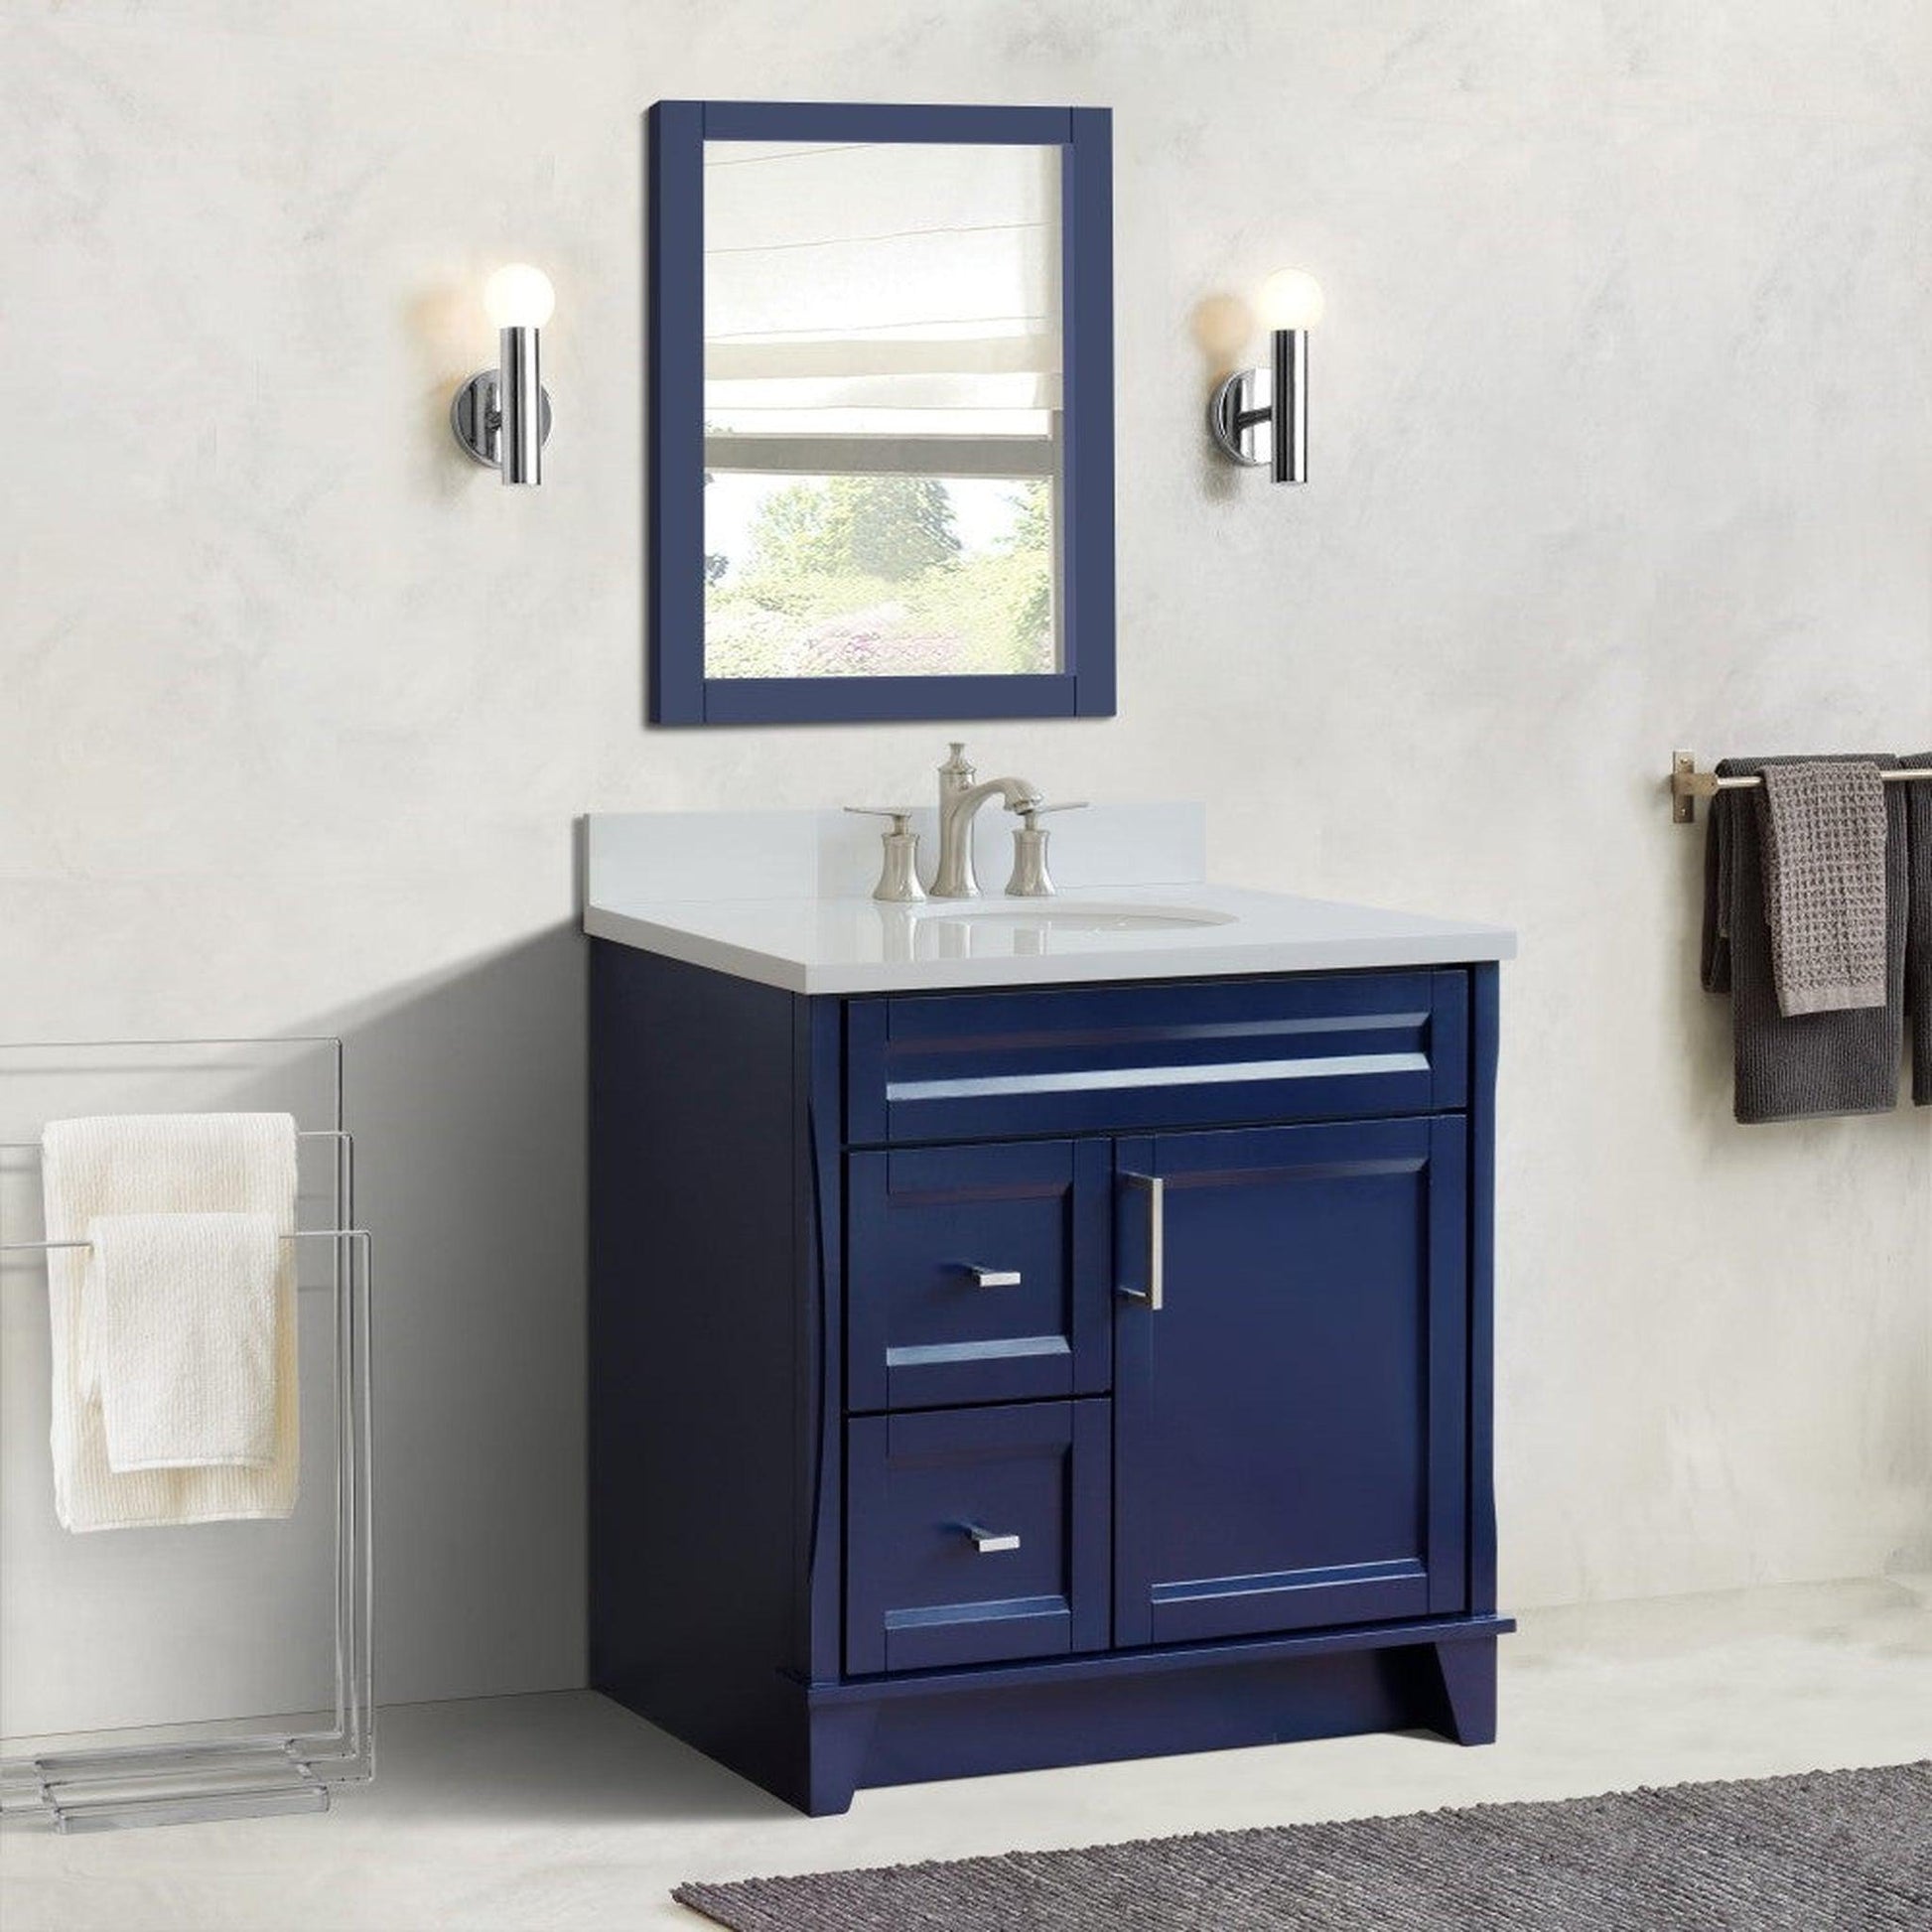 Bellaterra Home Terni 37" 1-Door 2-Drawer Blue Freestanding Vanity Set With Ceramic Center Undermount Oval Sink and White Quartz Top, and Right Door Base